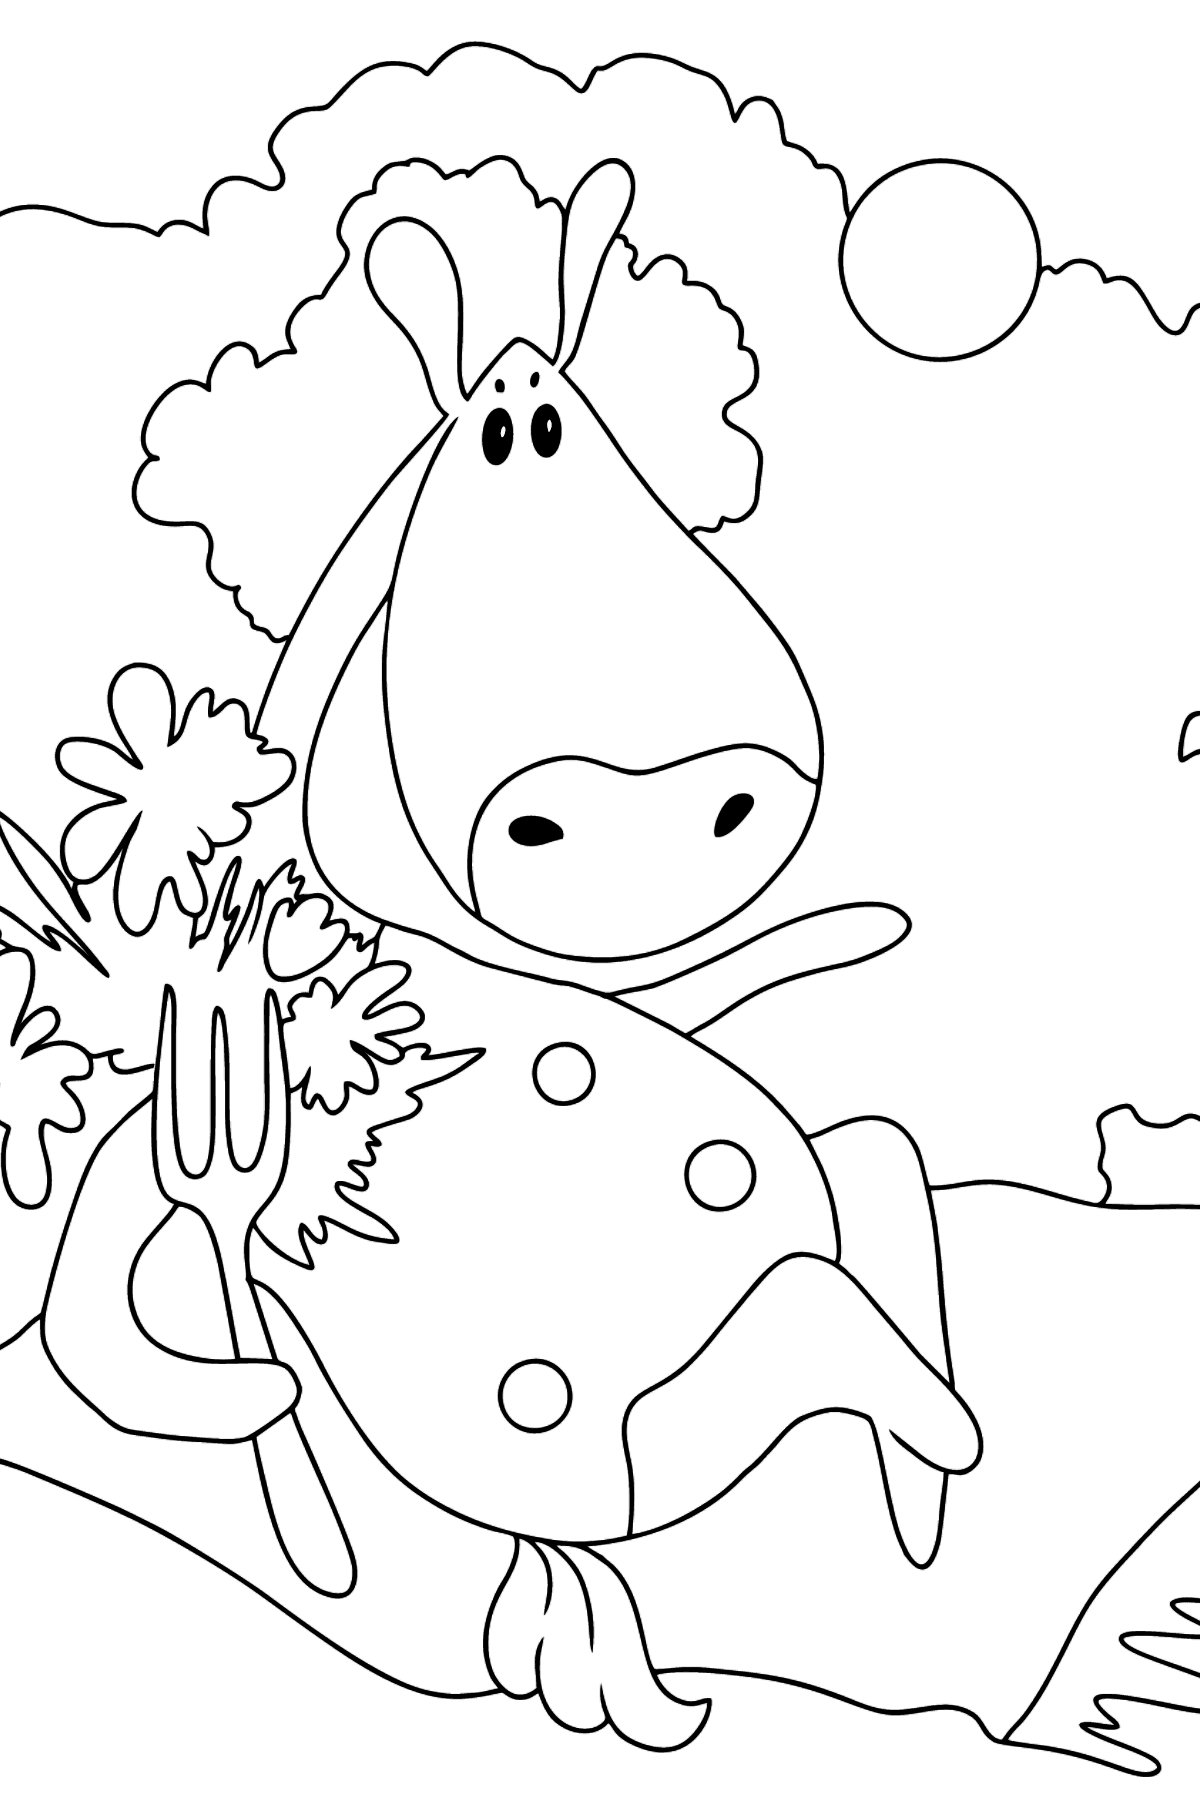 Coloring page a horse on the carpet - Coloring Pages for Kids